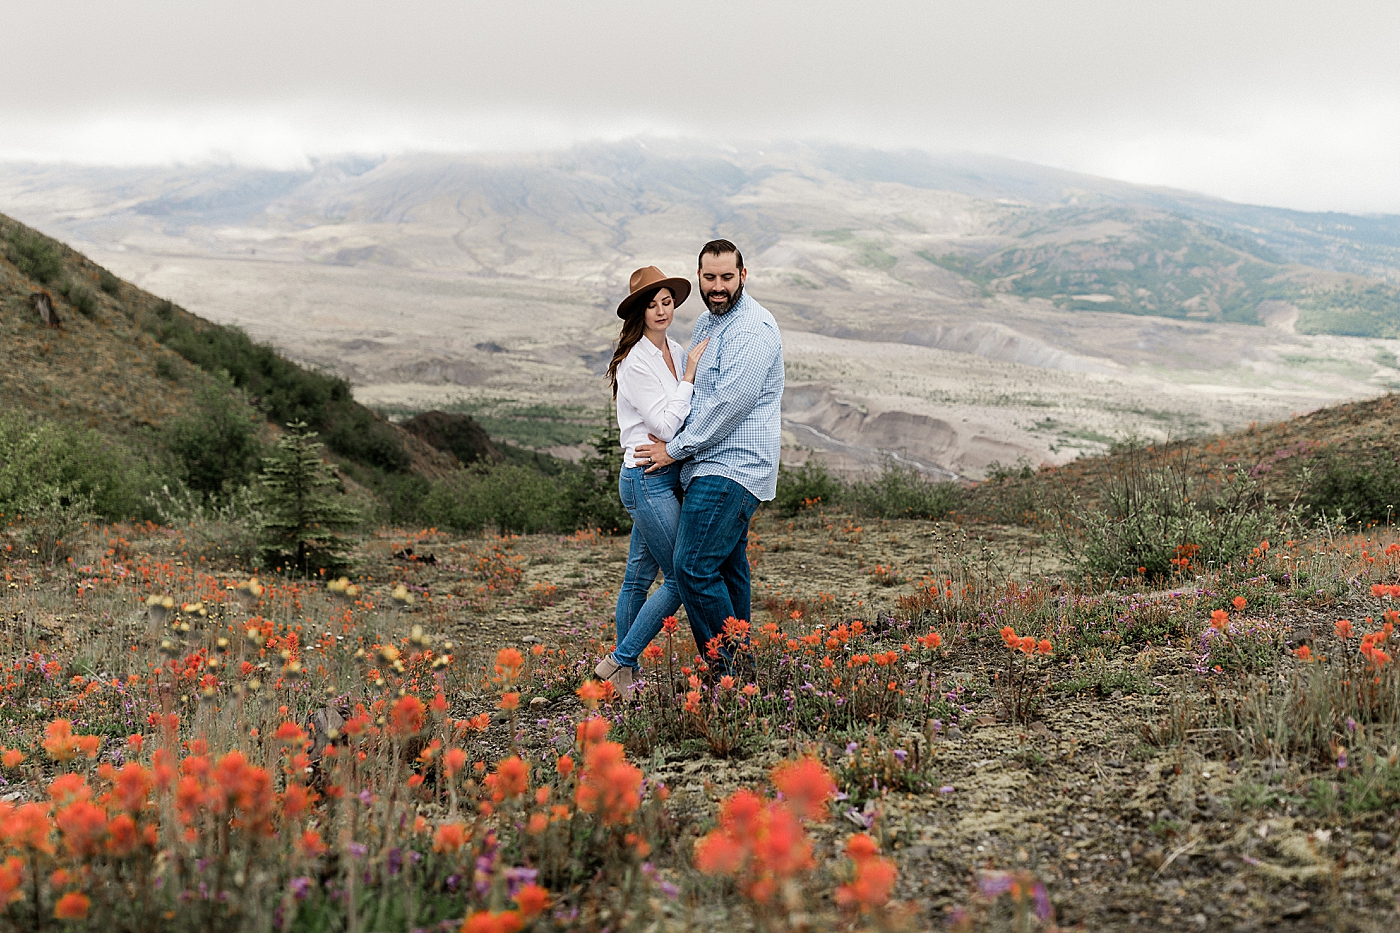 Mount St. Helens Photoshoot with the wildflowers | Megan Montalvo Photography